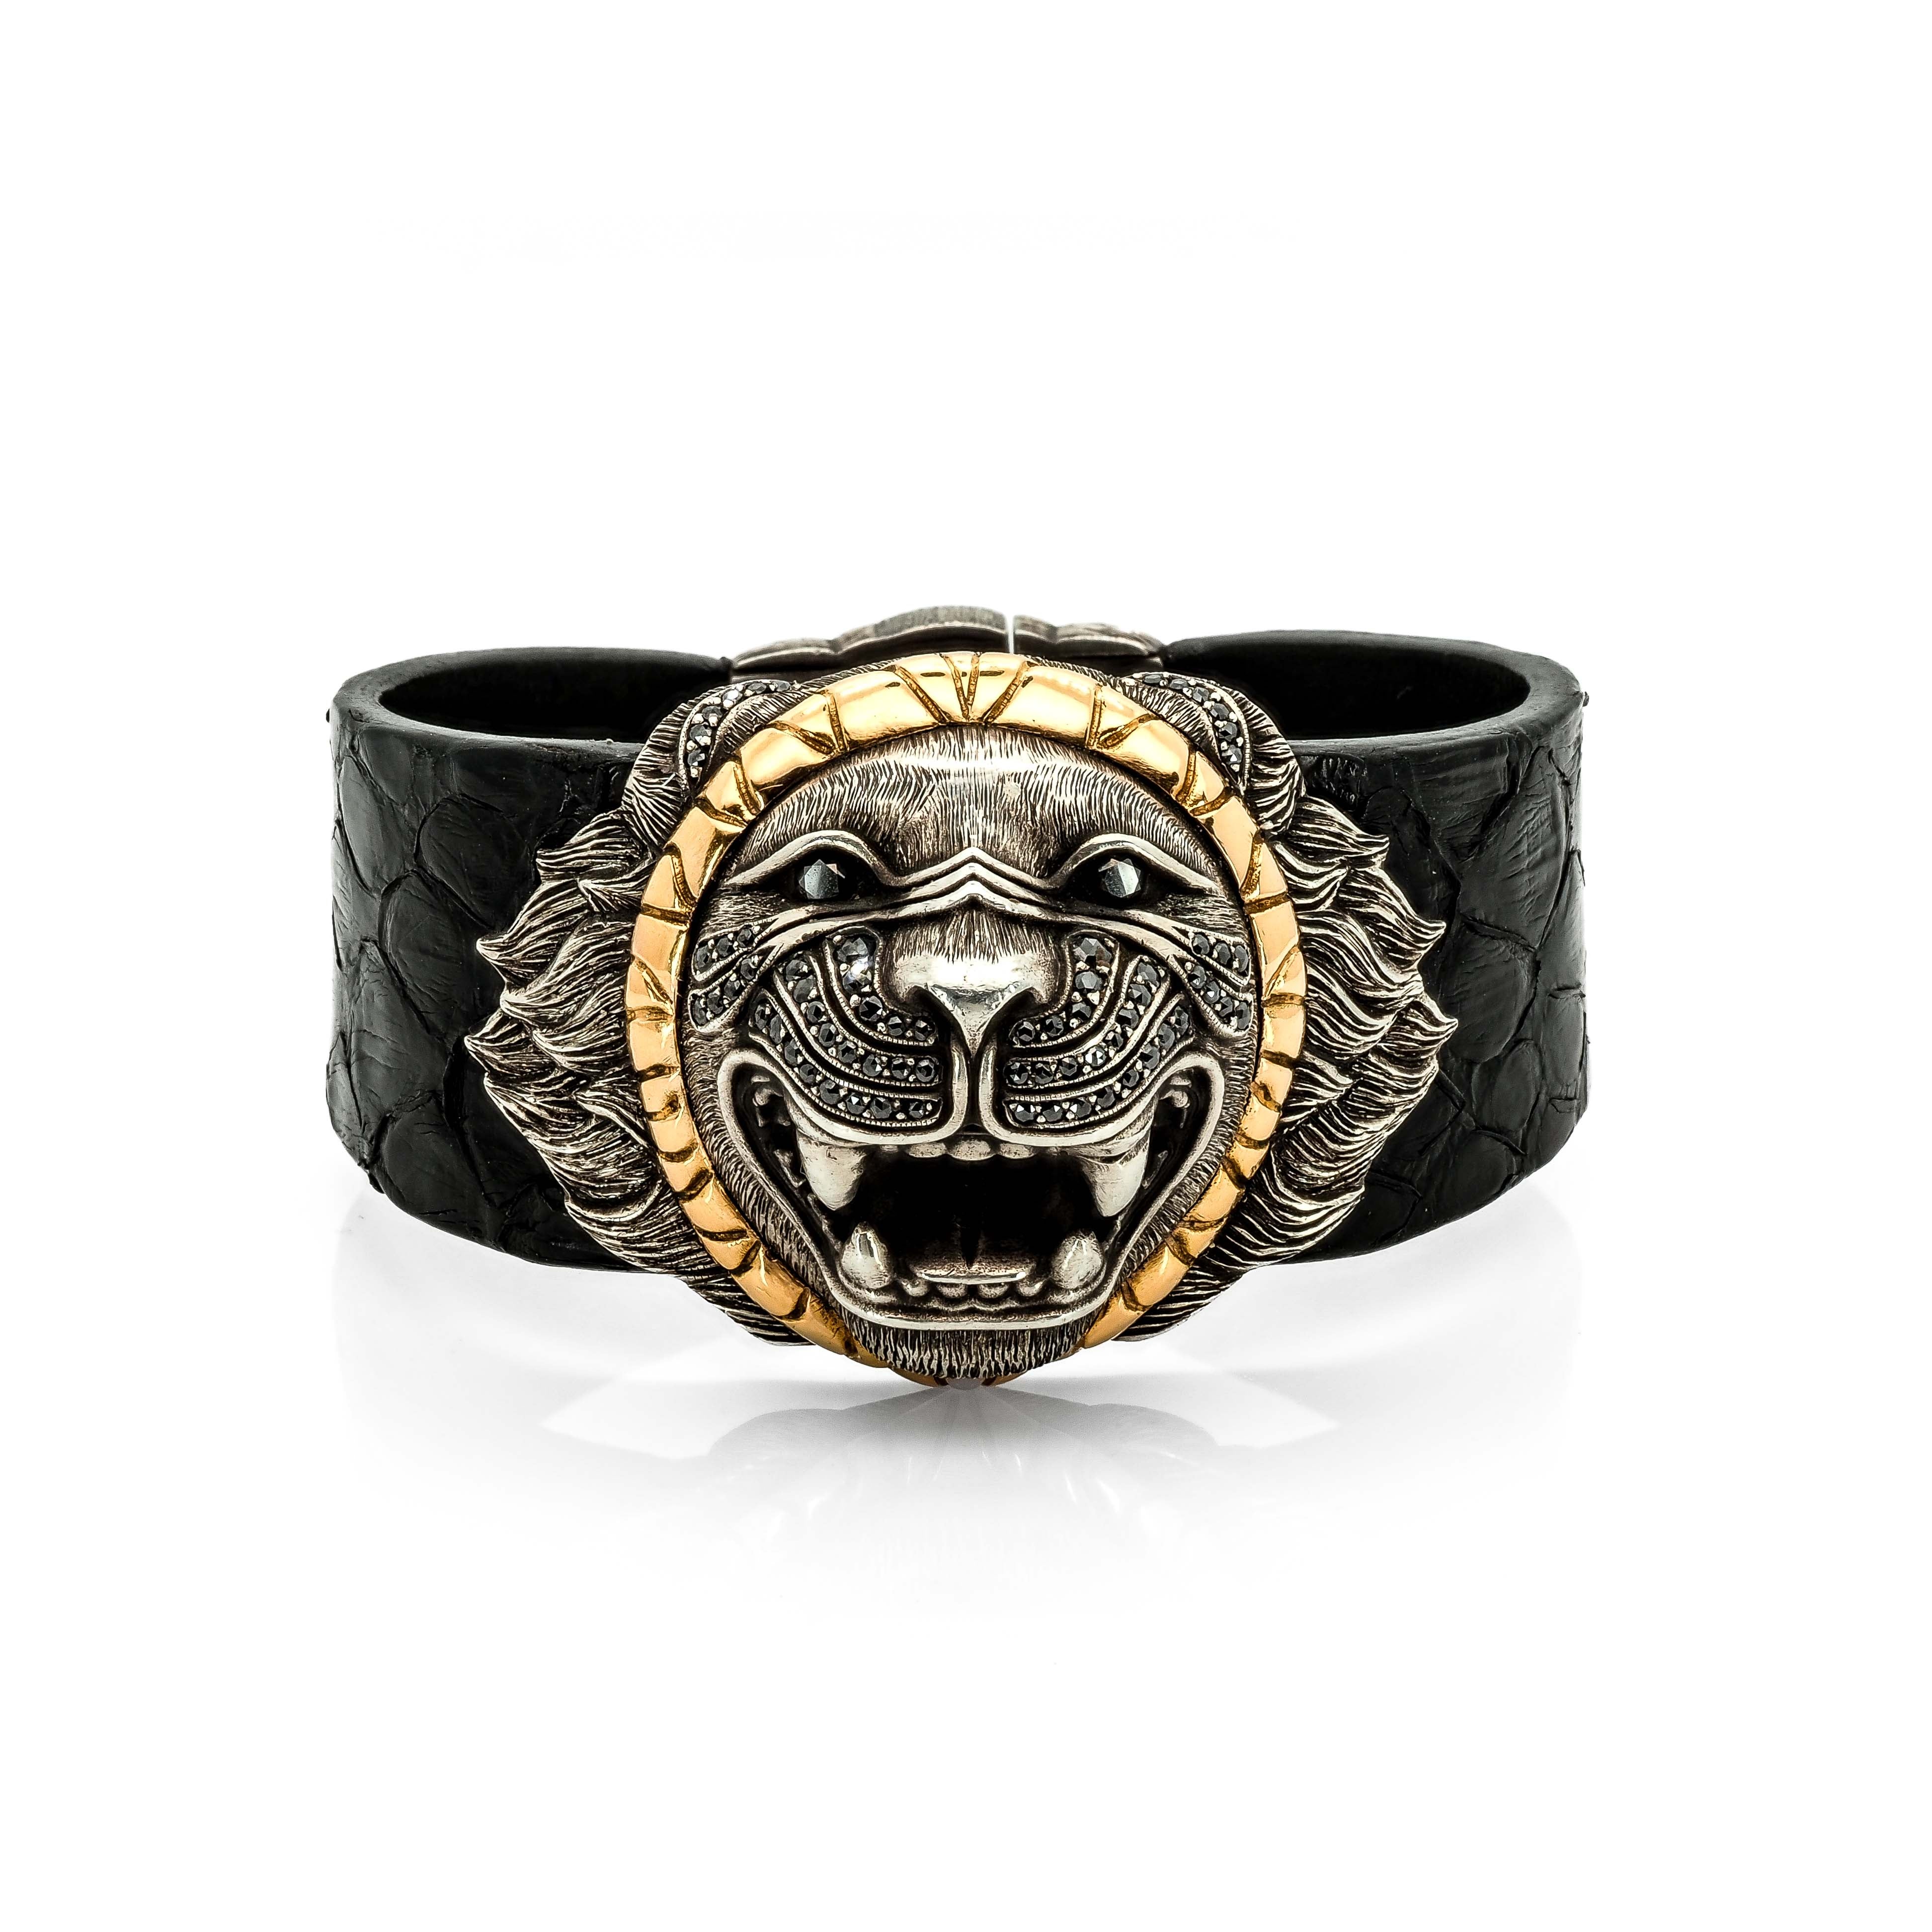 Taru Jewelry luxurious lion bracelet is crafted from 18K gold, sterling silver, and features black diamonds. The lion&#39;s face is hand-engraved to capture the intricate details of its fur, and the mane is further accentuated in the clasp with colorful natural diamonds. The bracelet is finished with a black snake leather band, adding a touch of elegance to the piece.